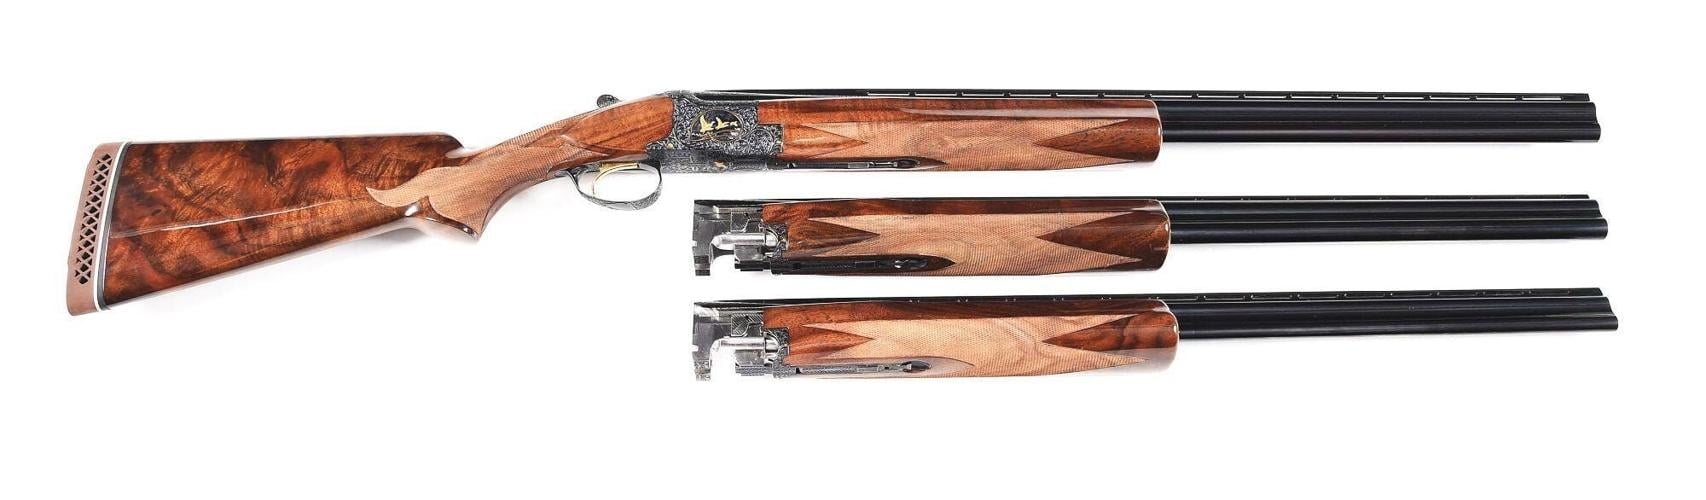 Kentucky long rifle could fetch half a million dollars at Morphy's